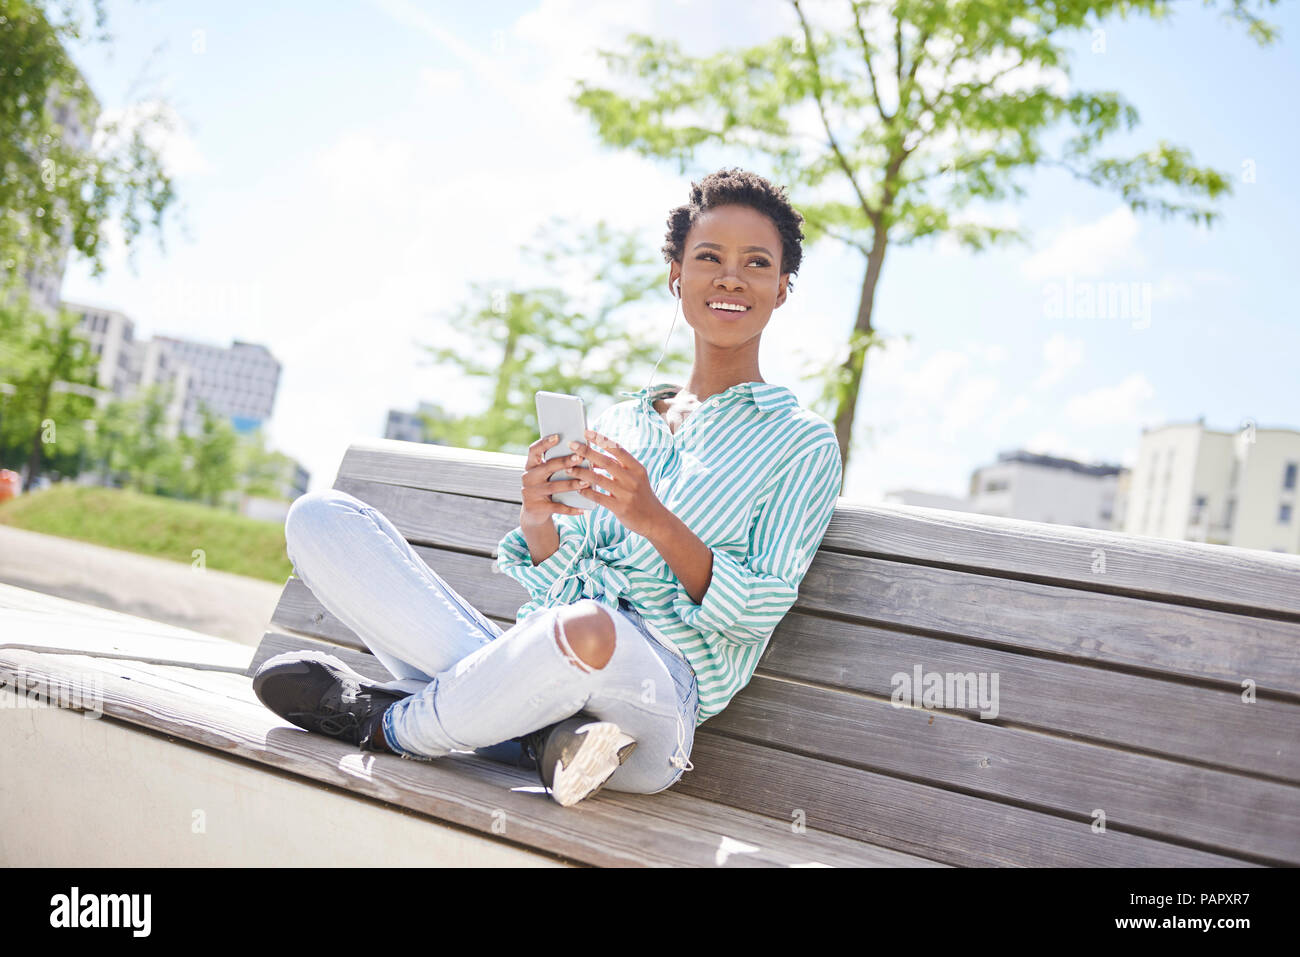 Portrait of smiling young woman with cell phone and earphones sitting on bench Stock Photo